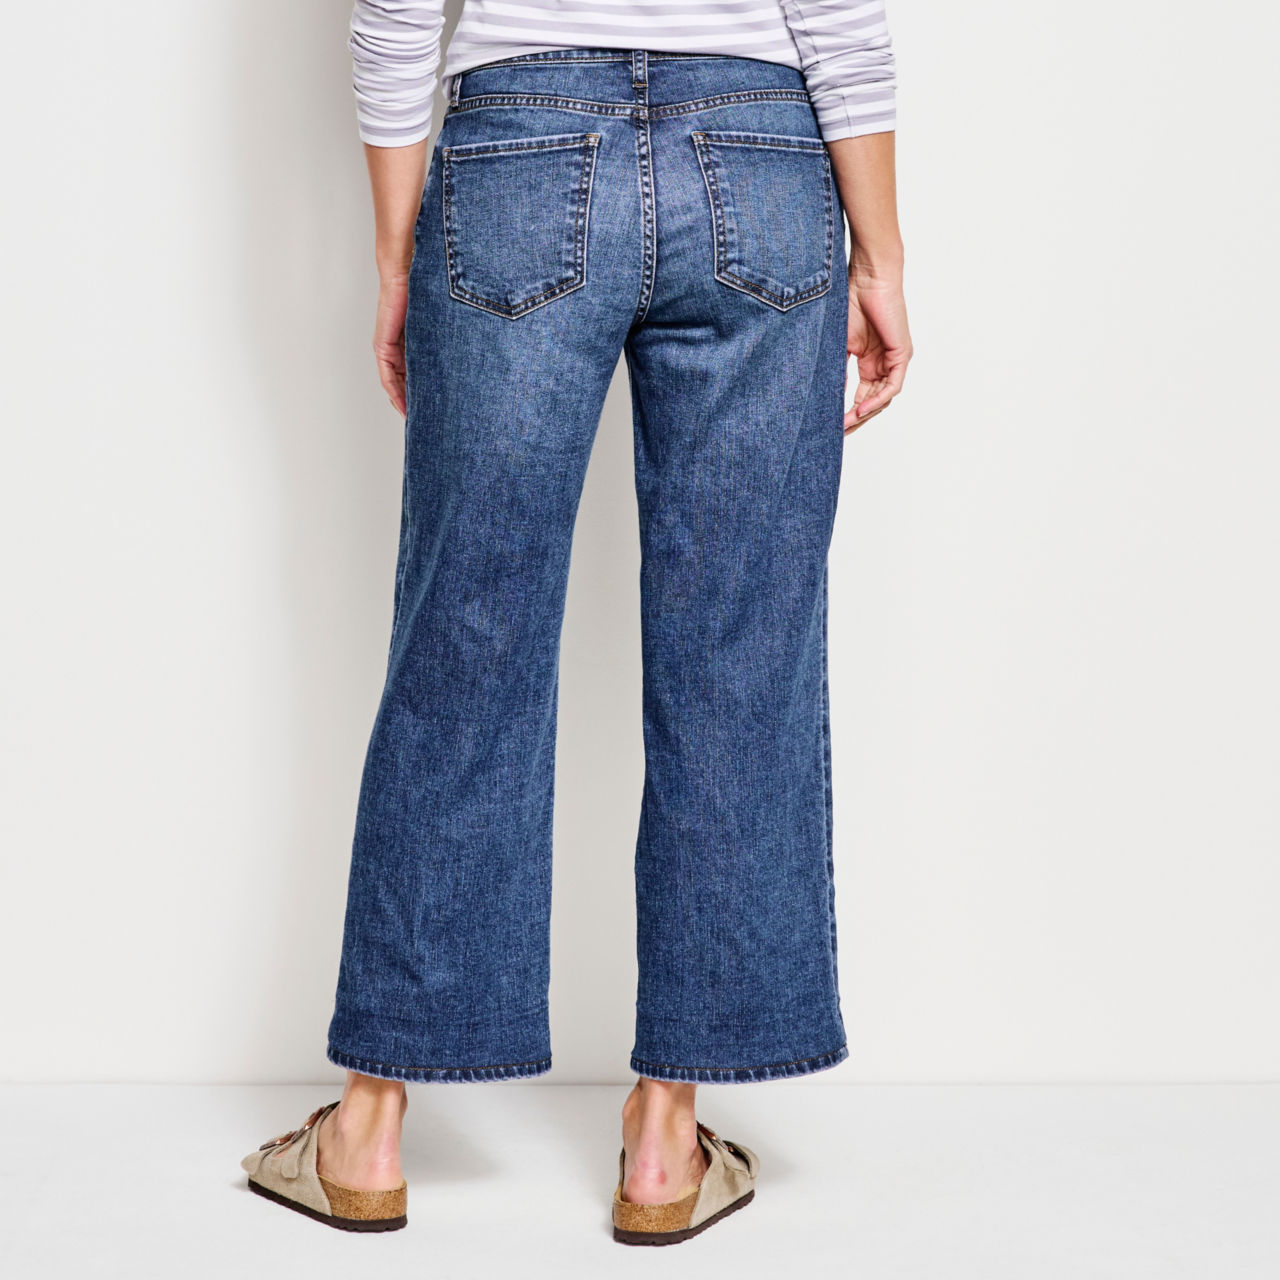 Kut from the Kloth® Charlotte Denim Wide-Crop Jeans - MED INDIGO HIRISE - EXCLUSIVE image number 2